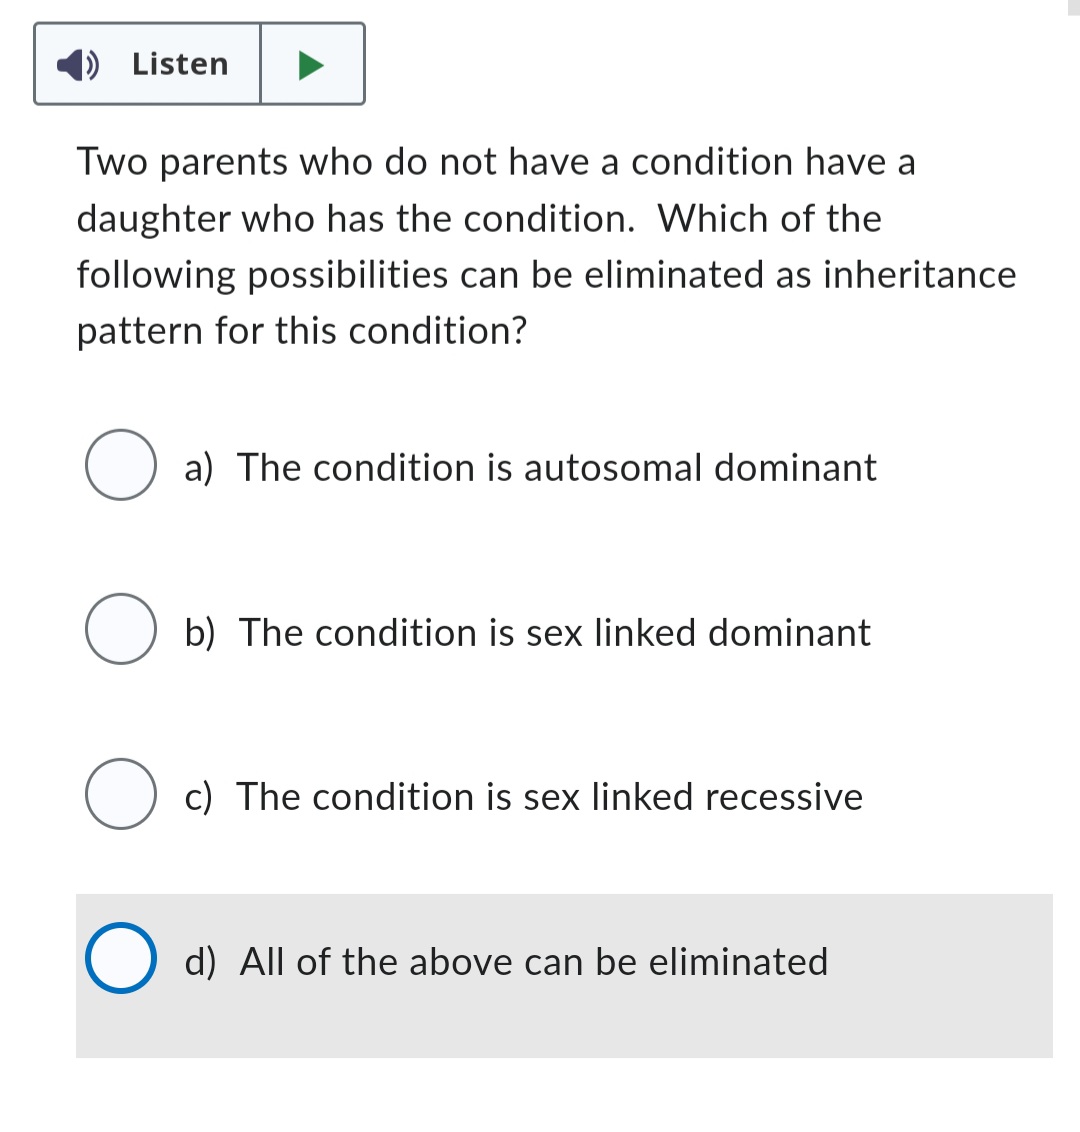 Listen
Two parents who do not have a condition have a
daughter who has the condition. Which of the
following possibilities can be eliminated as inheritance
pattern for this condition?
a) The condition is autosomal dominant
O
O c) The condition is sex linked recessive
b) The condition is sex linked dominant
d) All of the above can be eliminated